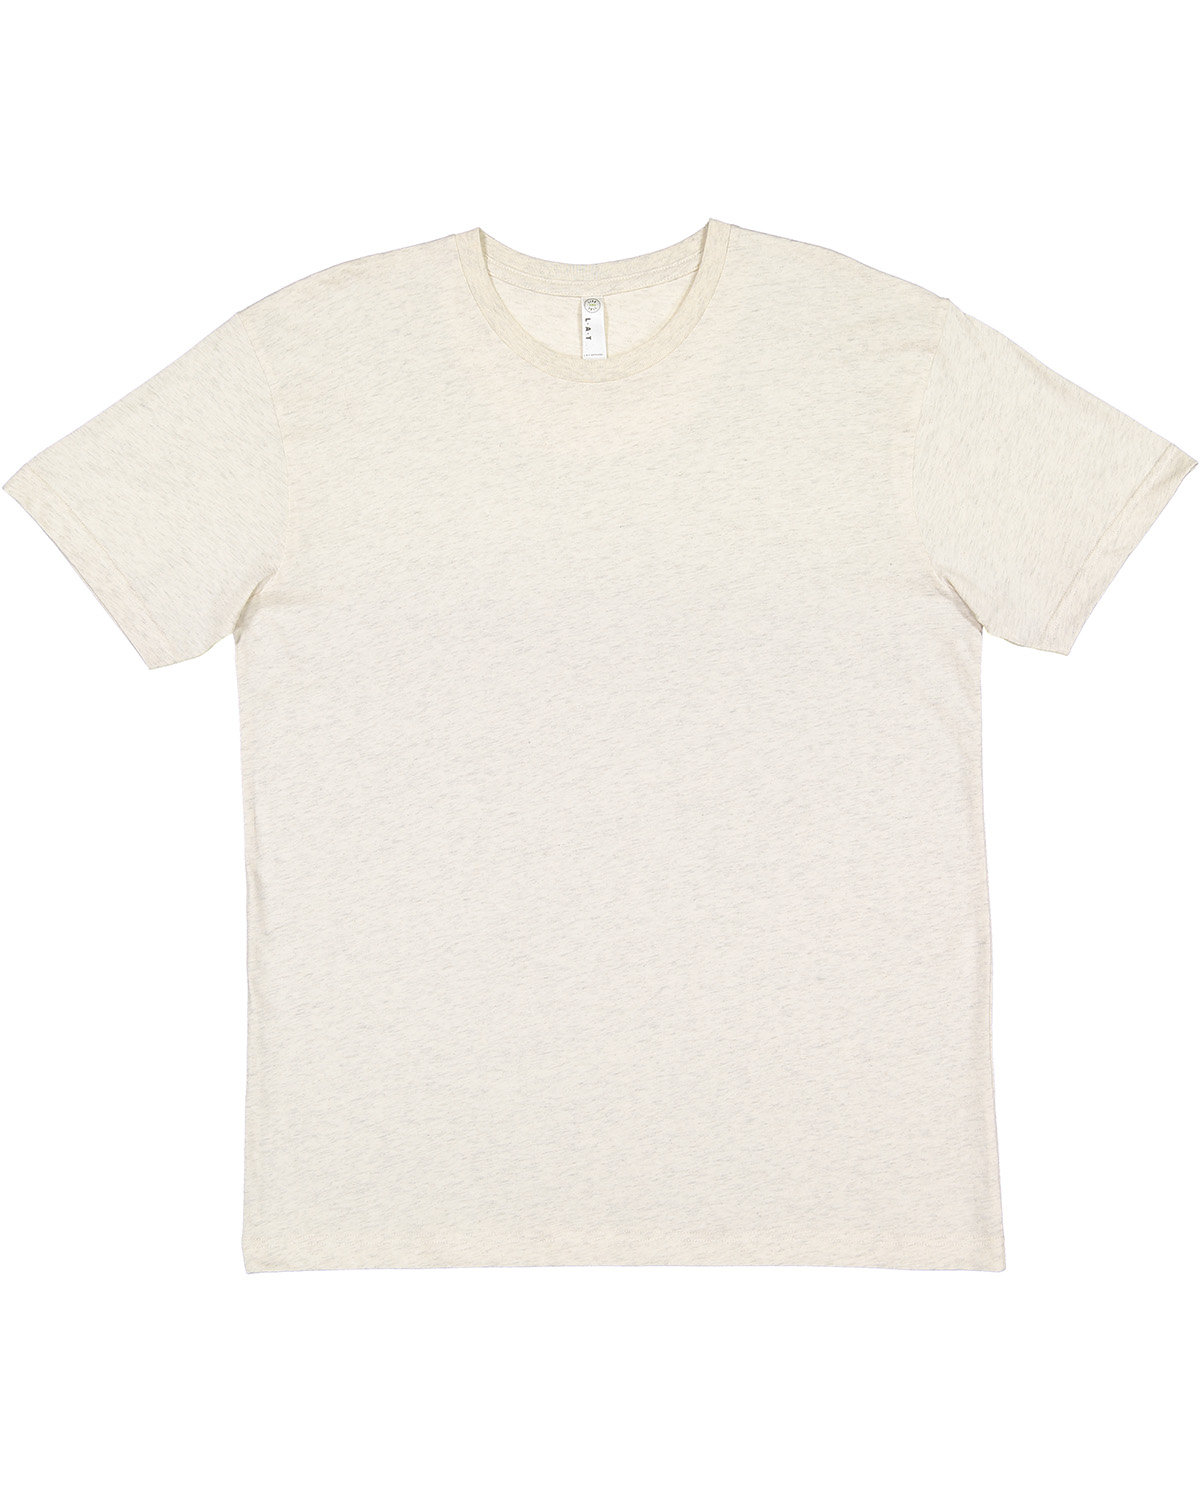 LAT Youth Fine Jersey T-Shirt natural heather 